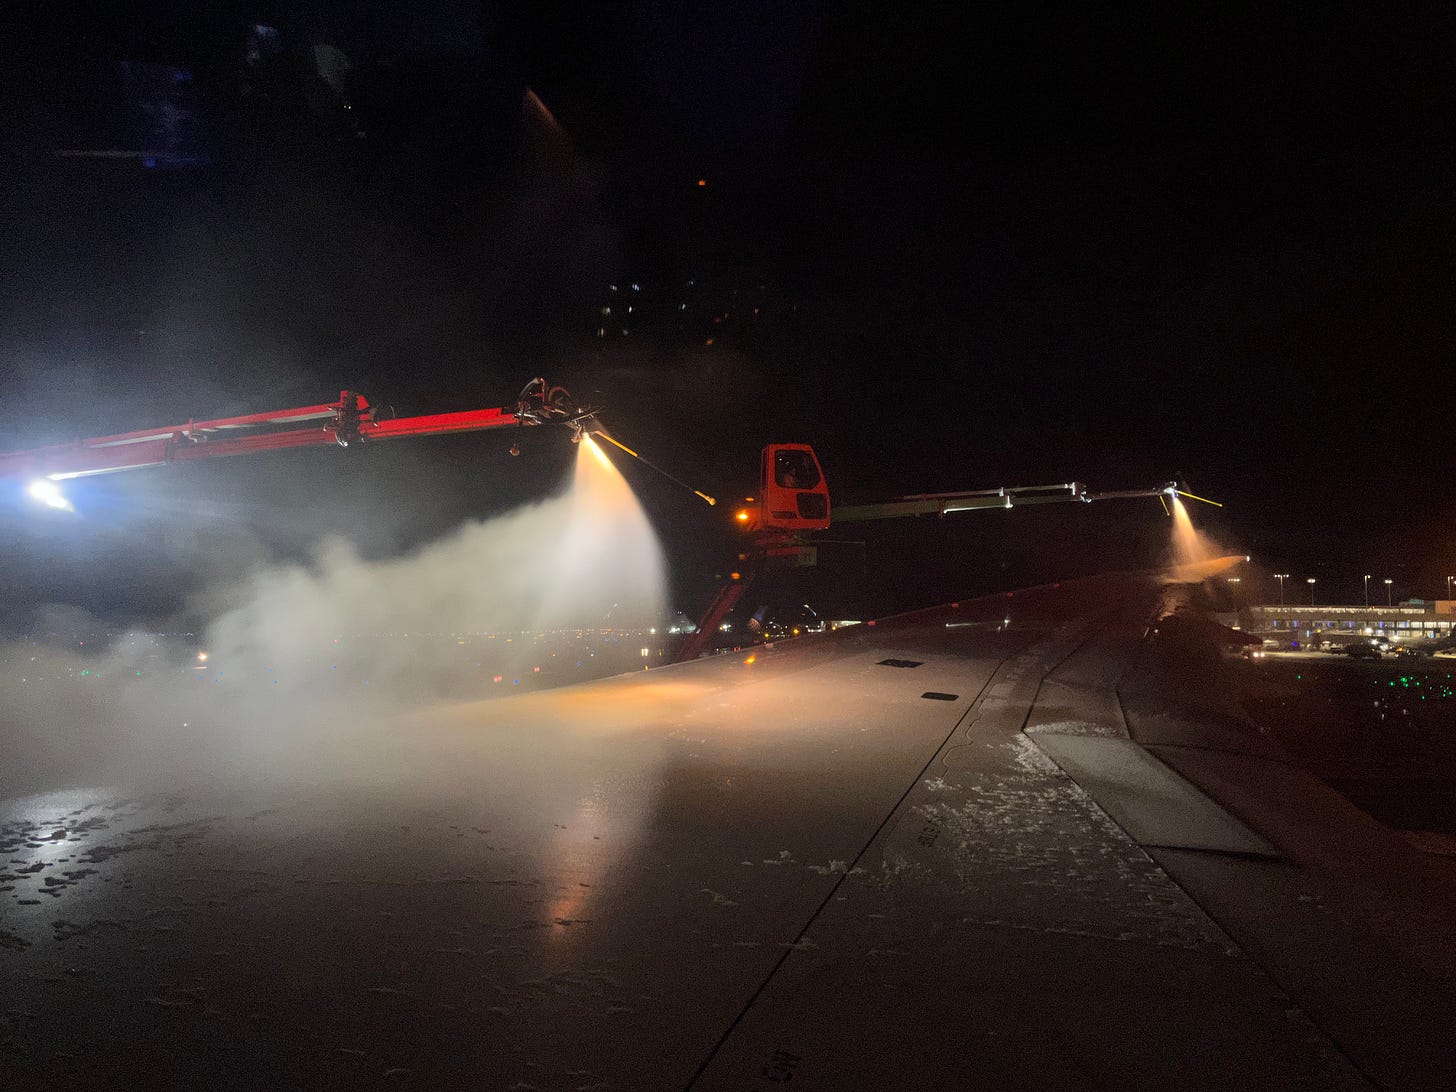 photo of the wing of a 787 airplane at night with two deicing machines spraying it